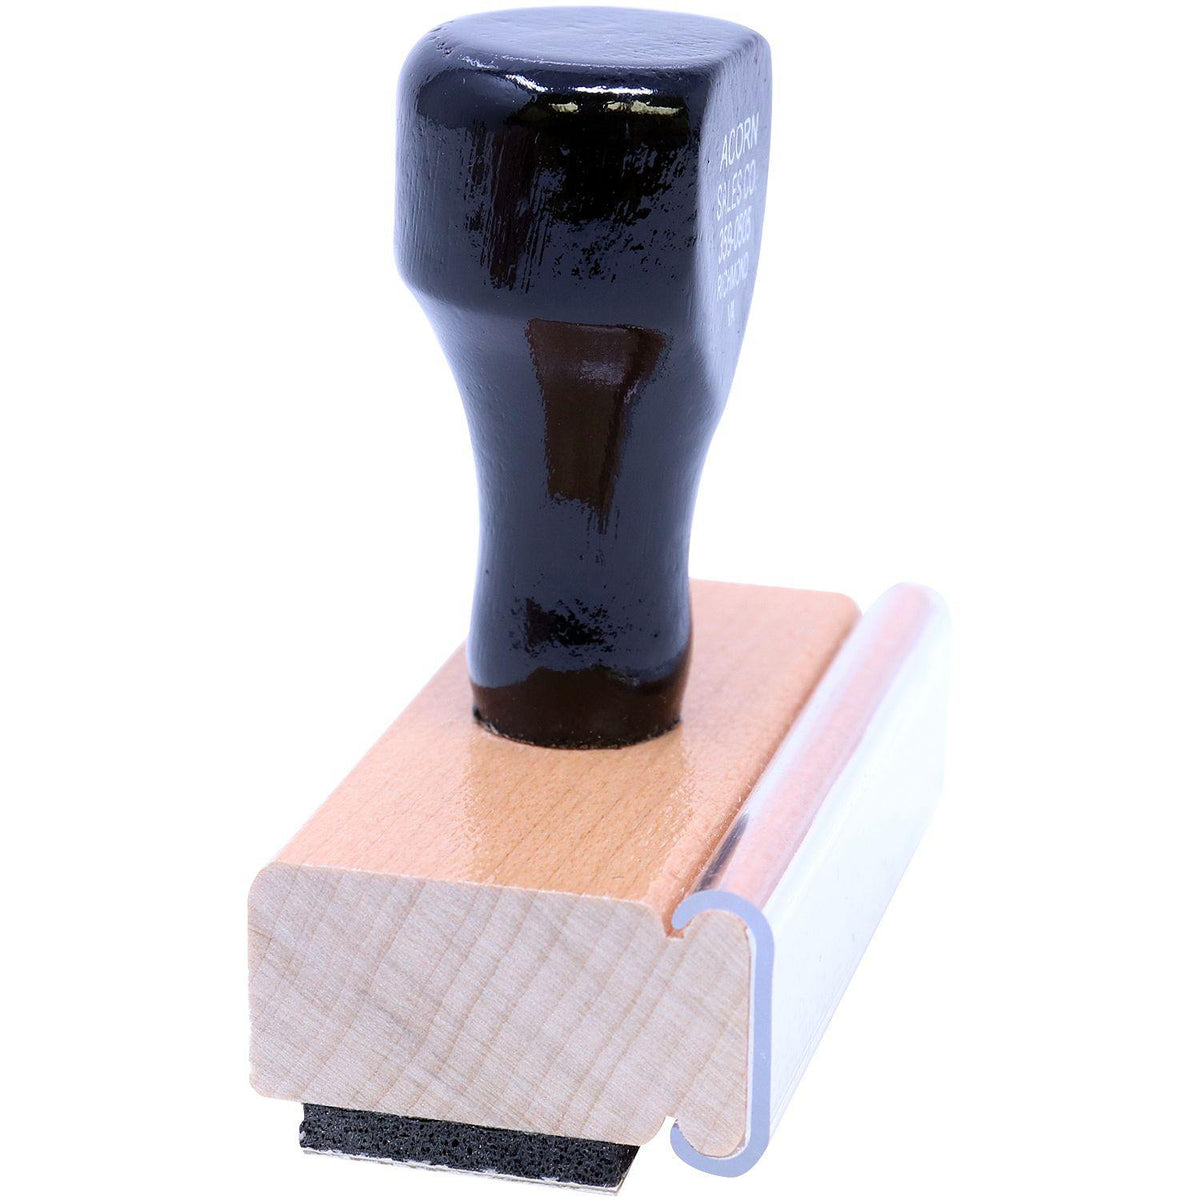 Side View of Large Please Forward Insurance Form Rubber Stamp at an Angle